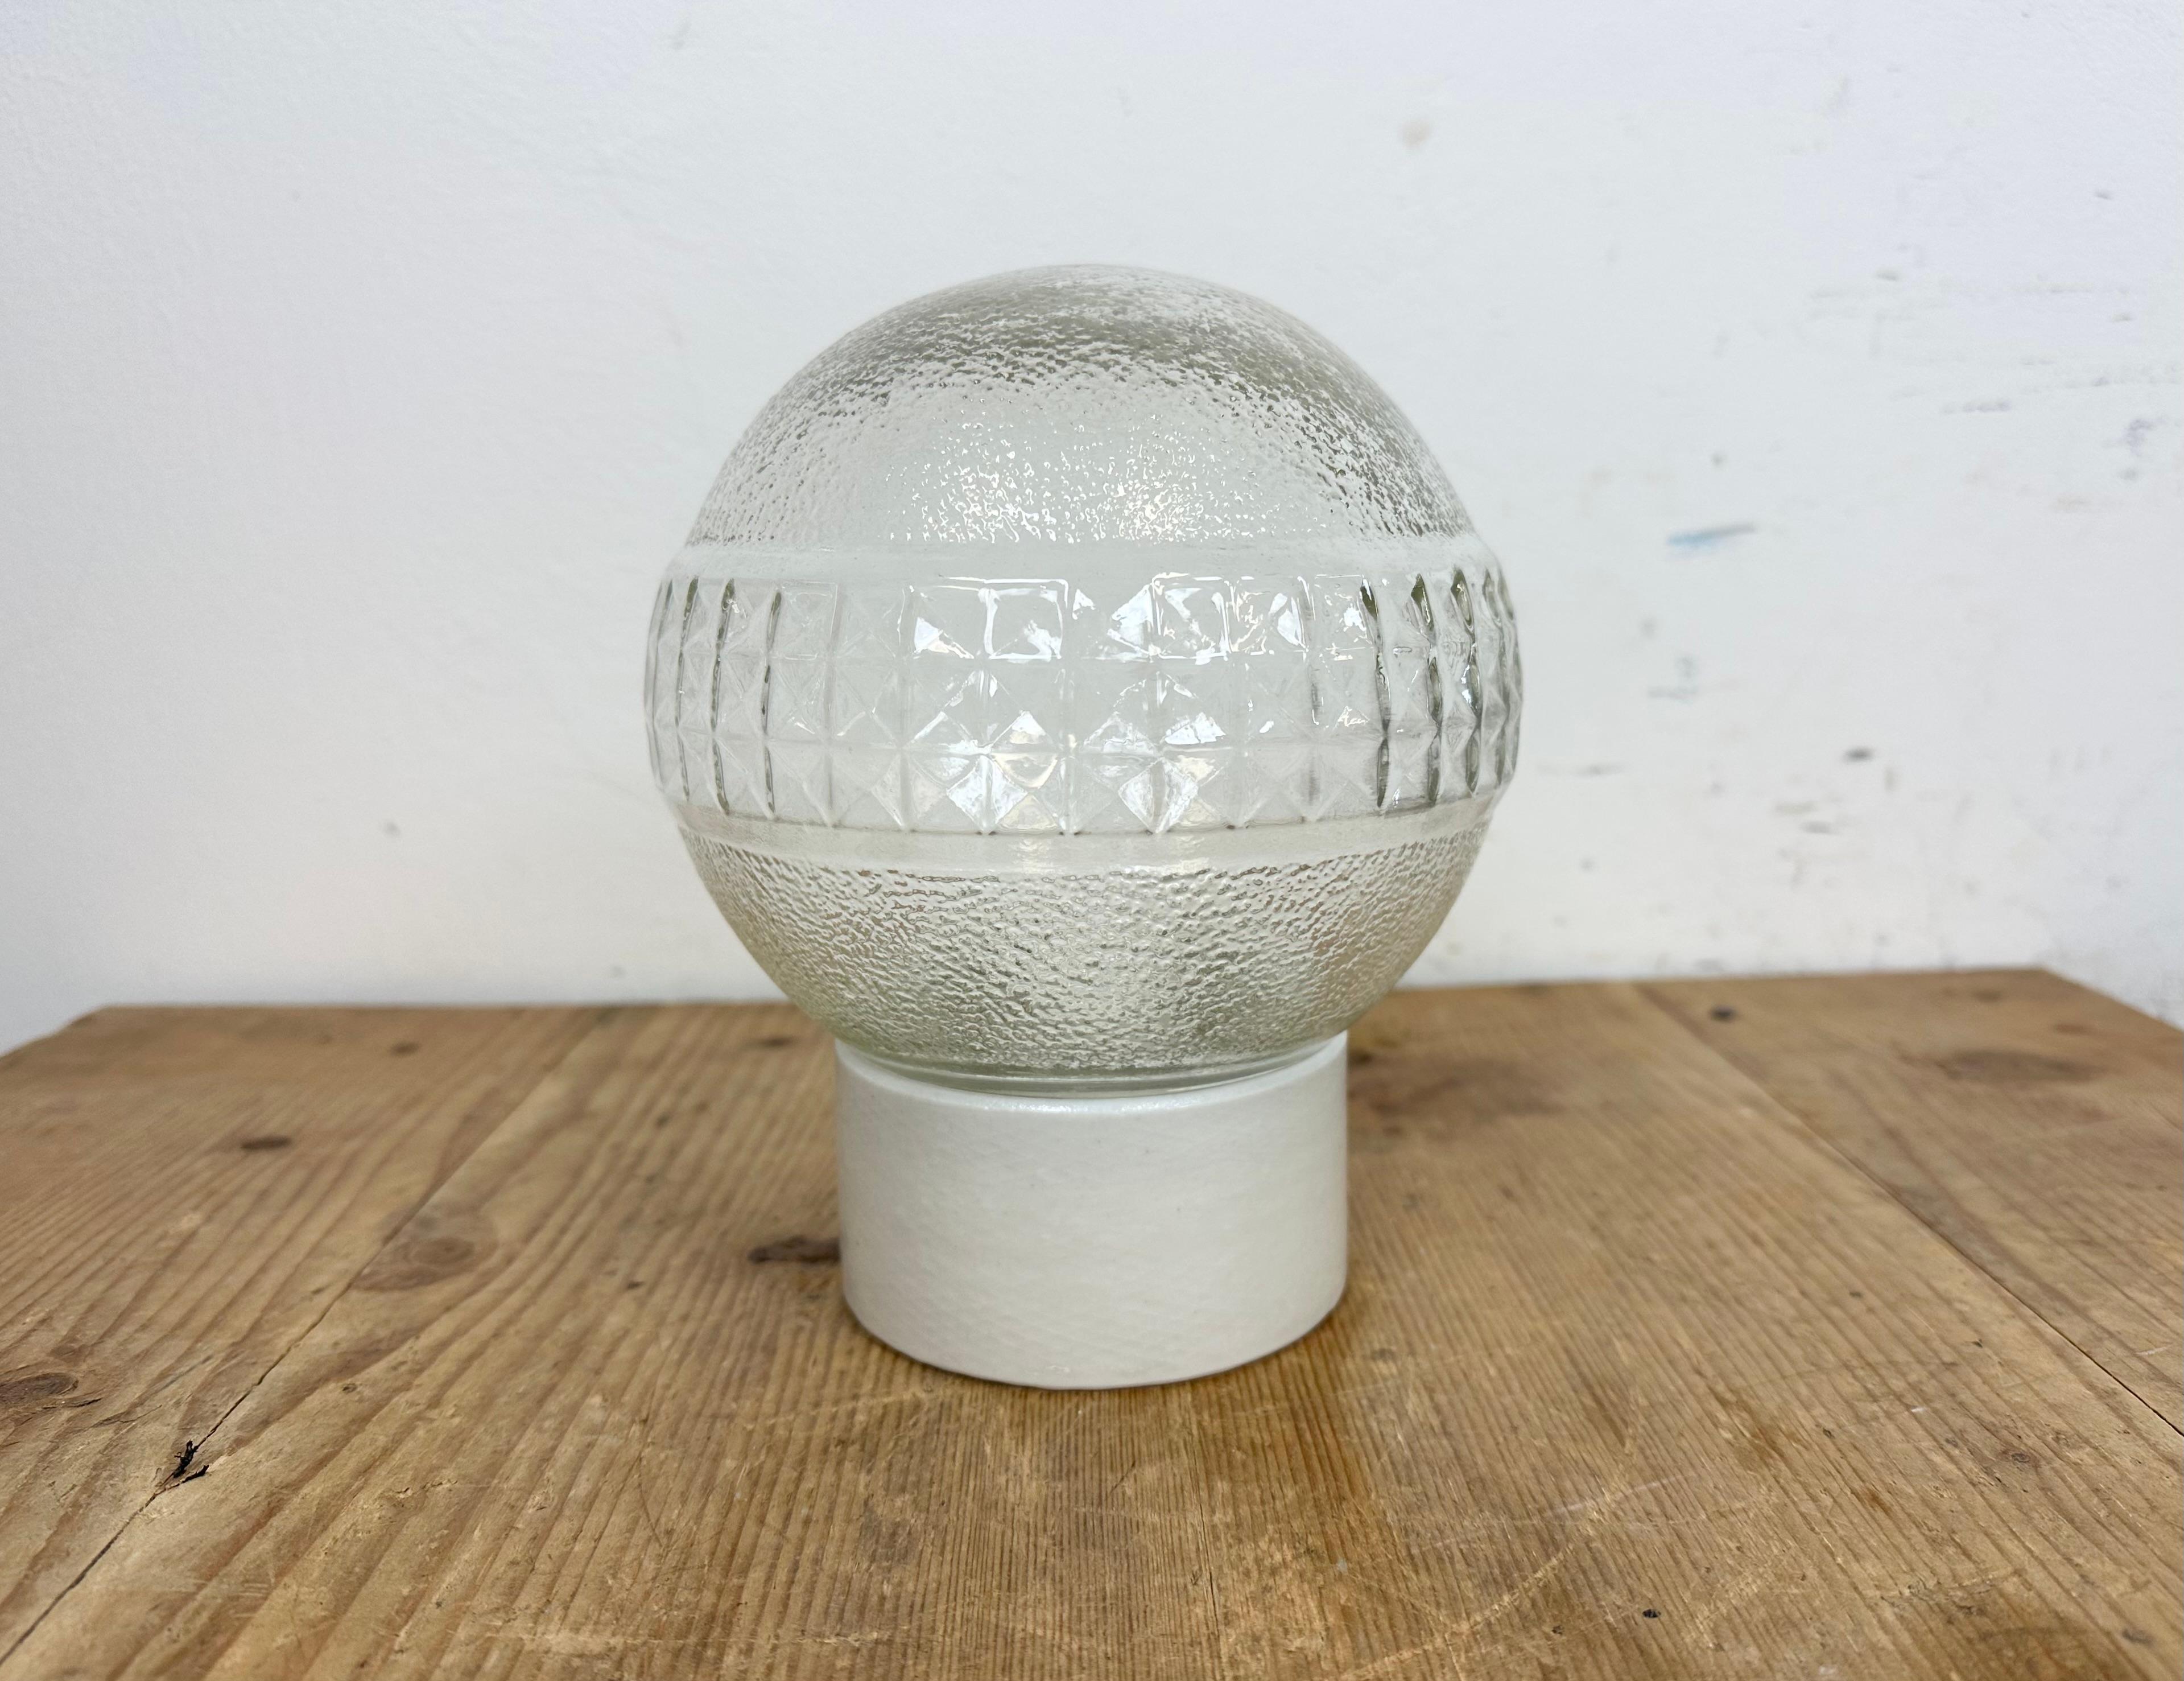 Vintage industrial ceiling or wall light  made in Poland during the 1970s. It features a white porcelain wall mounting and a glass cover. The socket requires E27/E 26 light bulbs. New wire. The weight of the lamp is 0,9 kg.
Dimensions: 
Diameter of